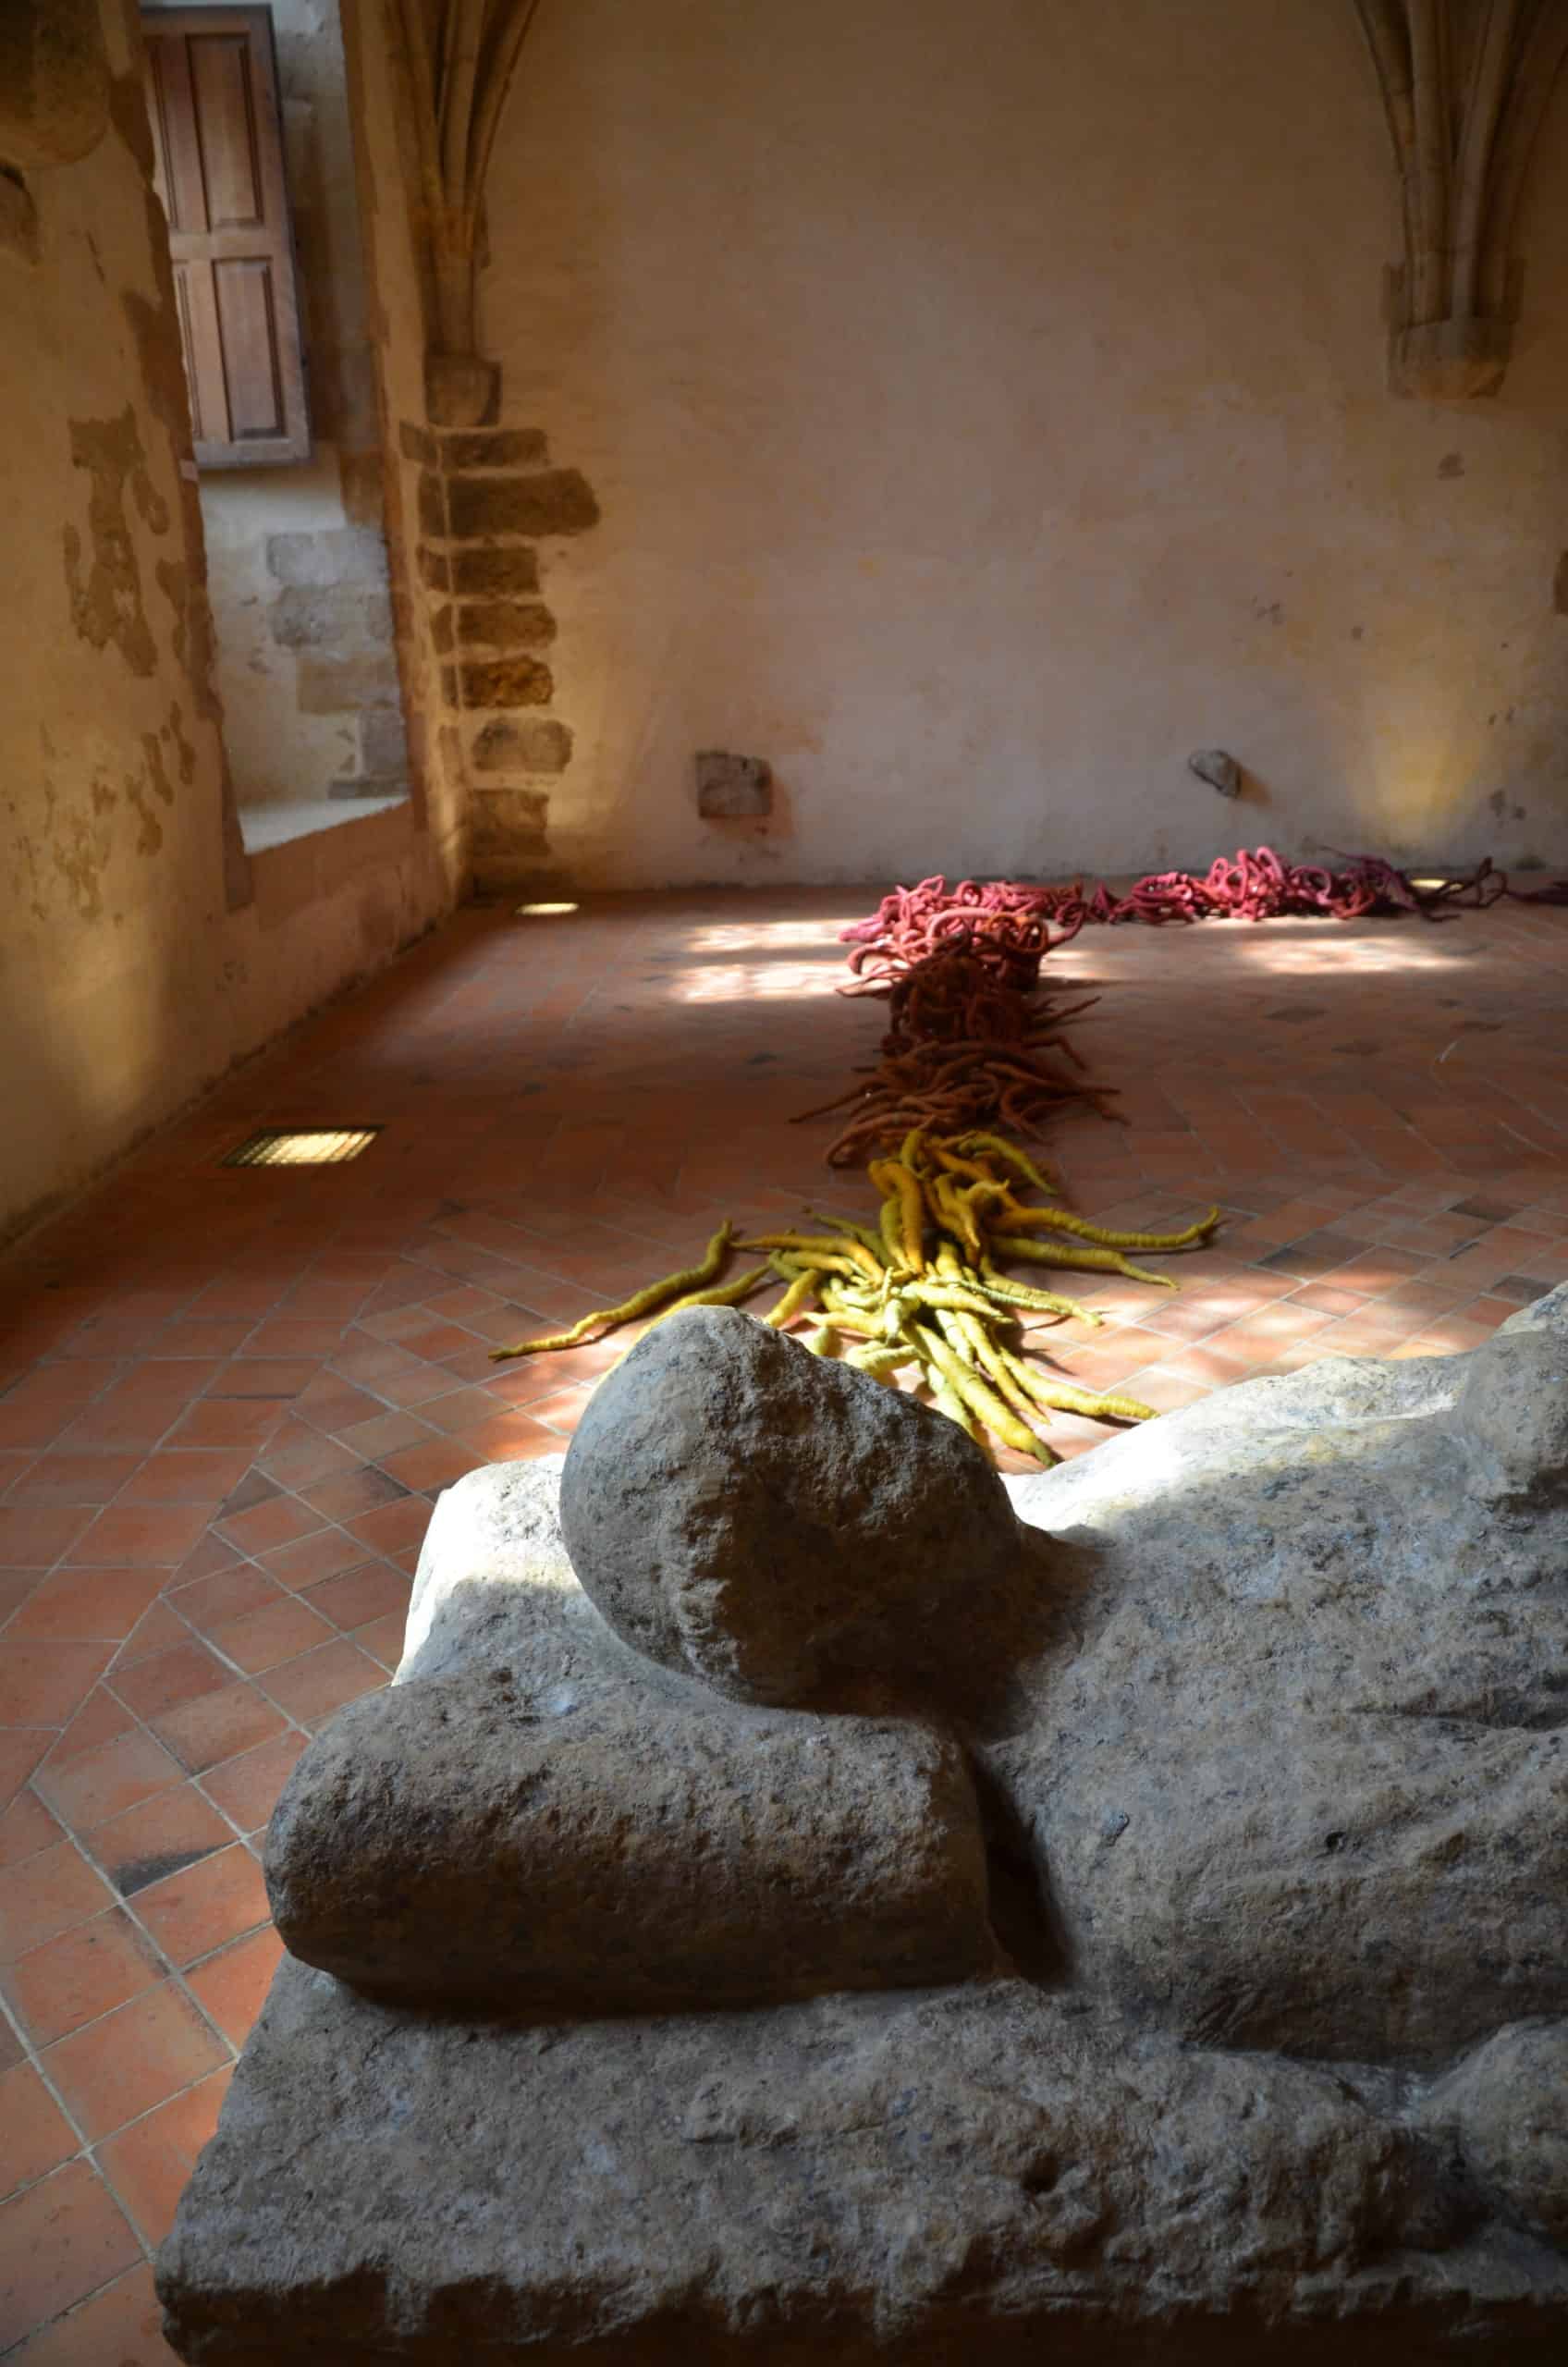 sculptures by Aude Franjou, exhibition in Chapel in Vivoin, France